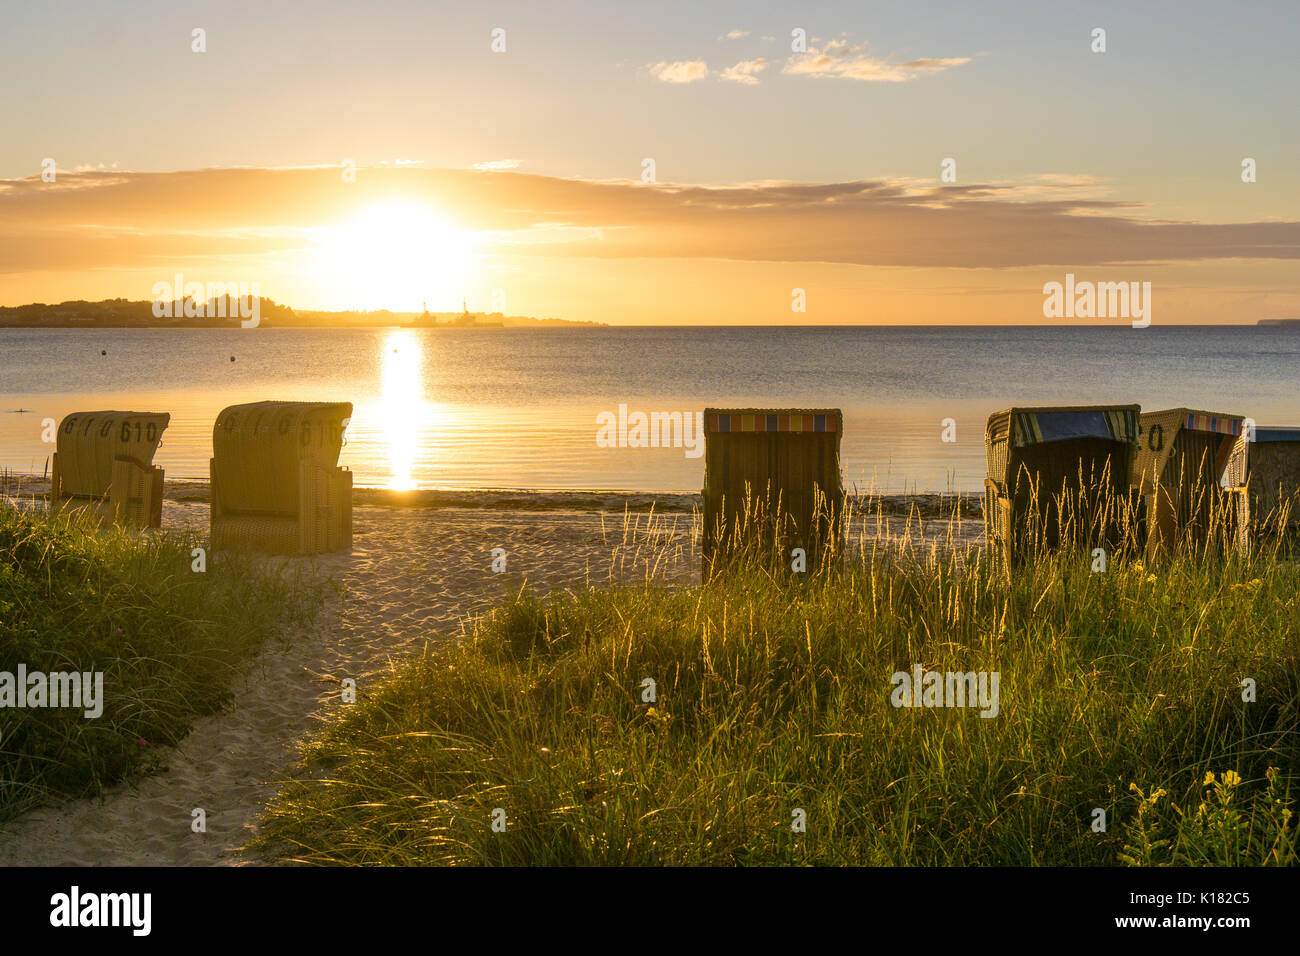 European Beach wicker chairs are placed decoratively on the beach for summer guests in the sunrise by the quiet sea Stock Photo